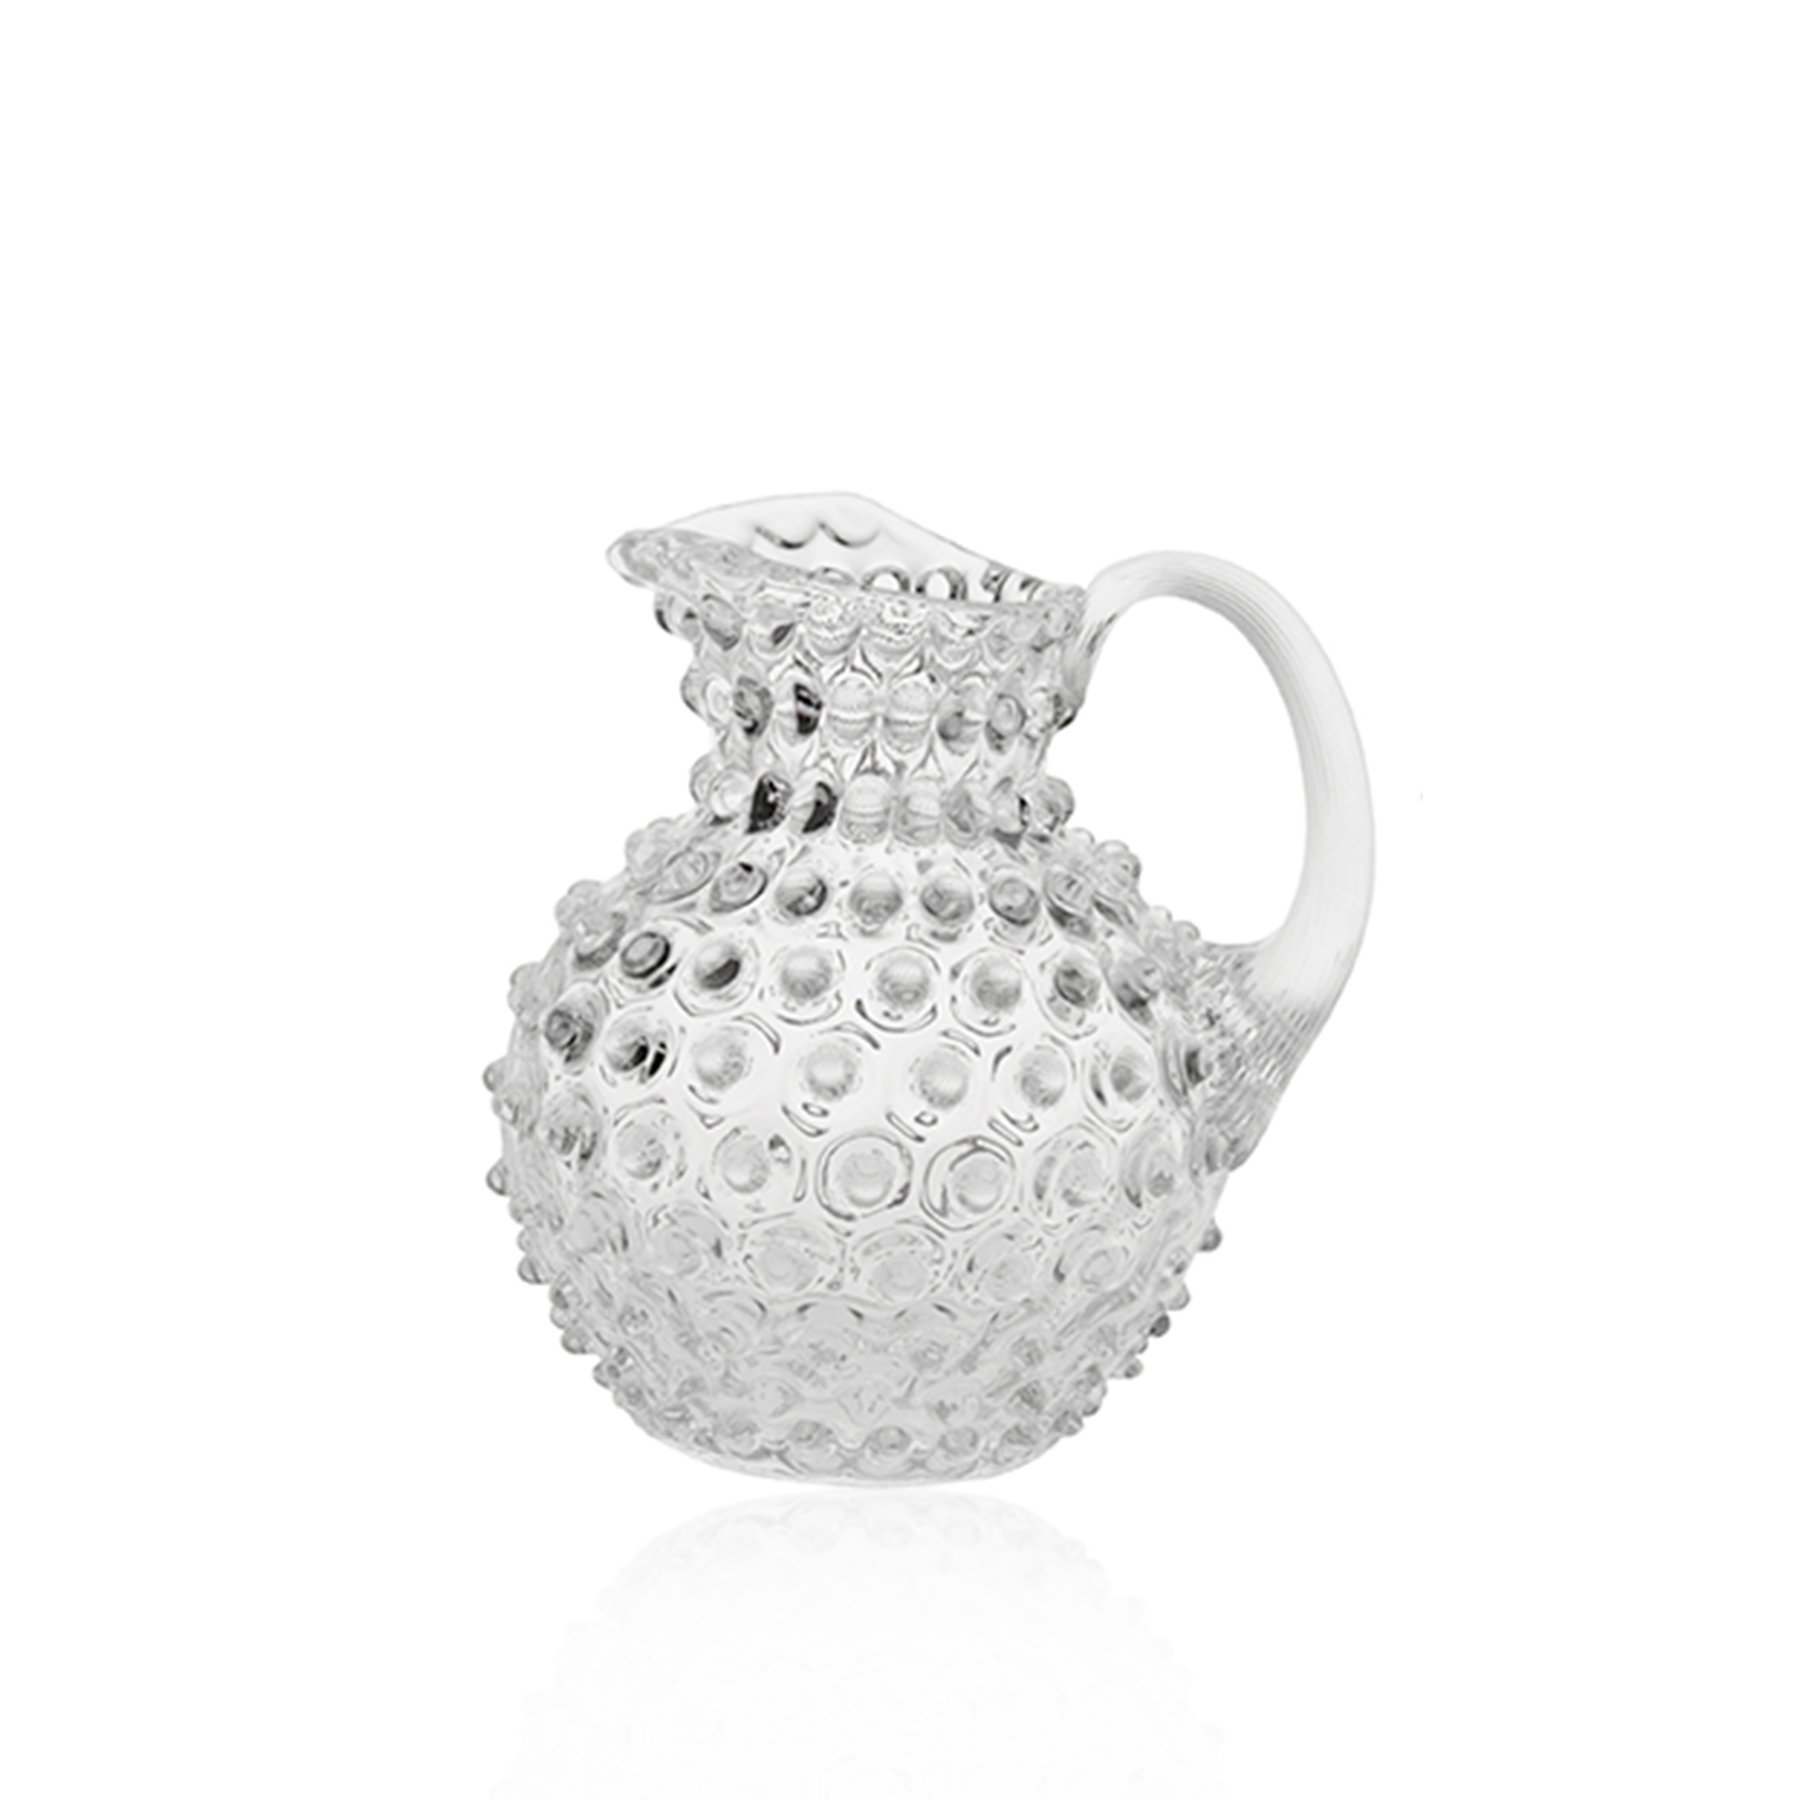 Or & Wonder Collection Medium Clear Hobnail Pitcher